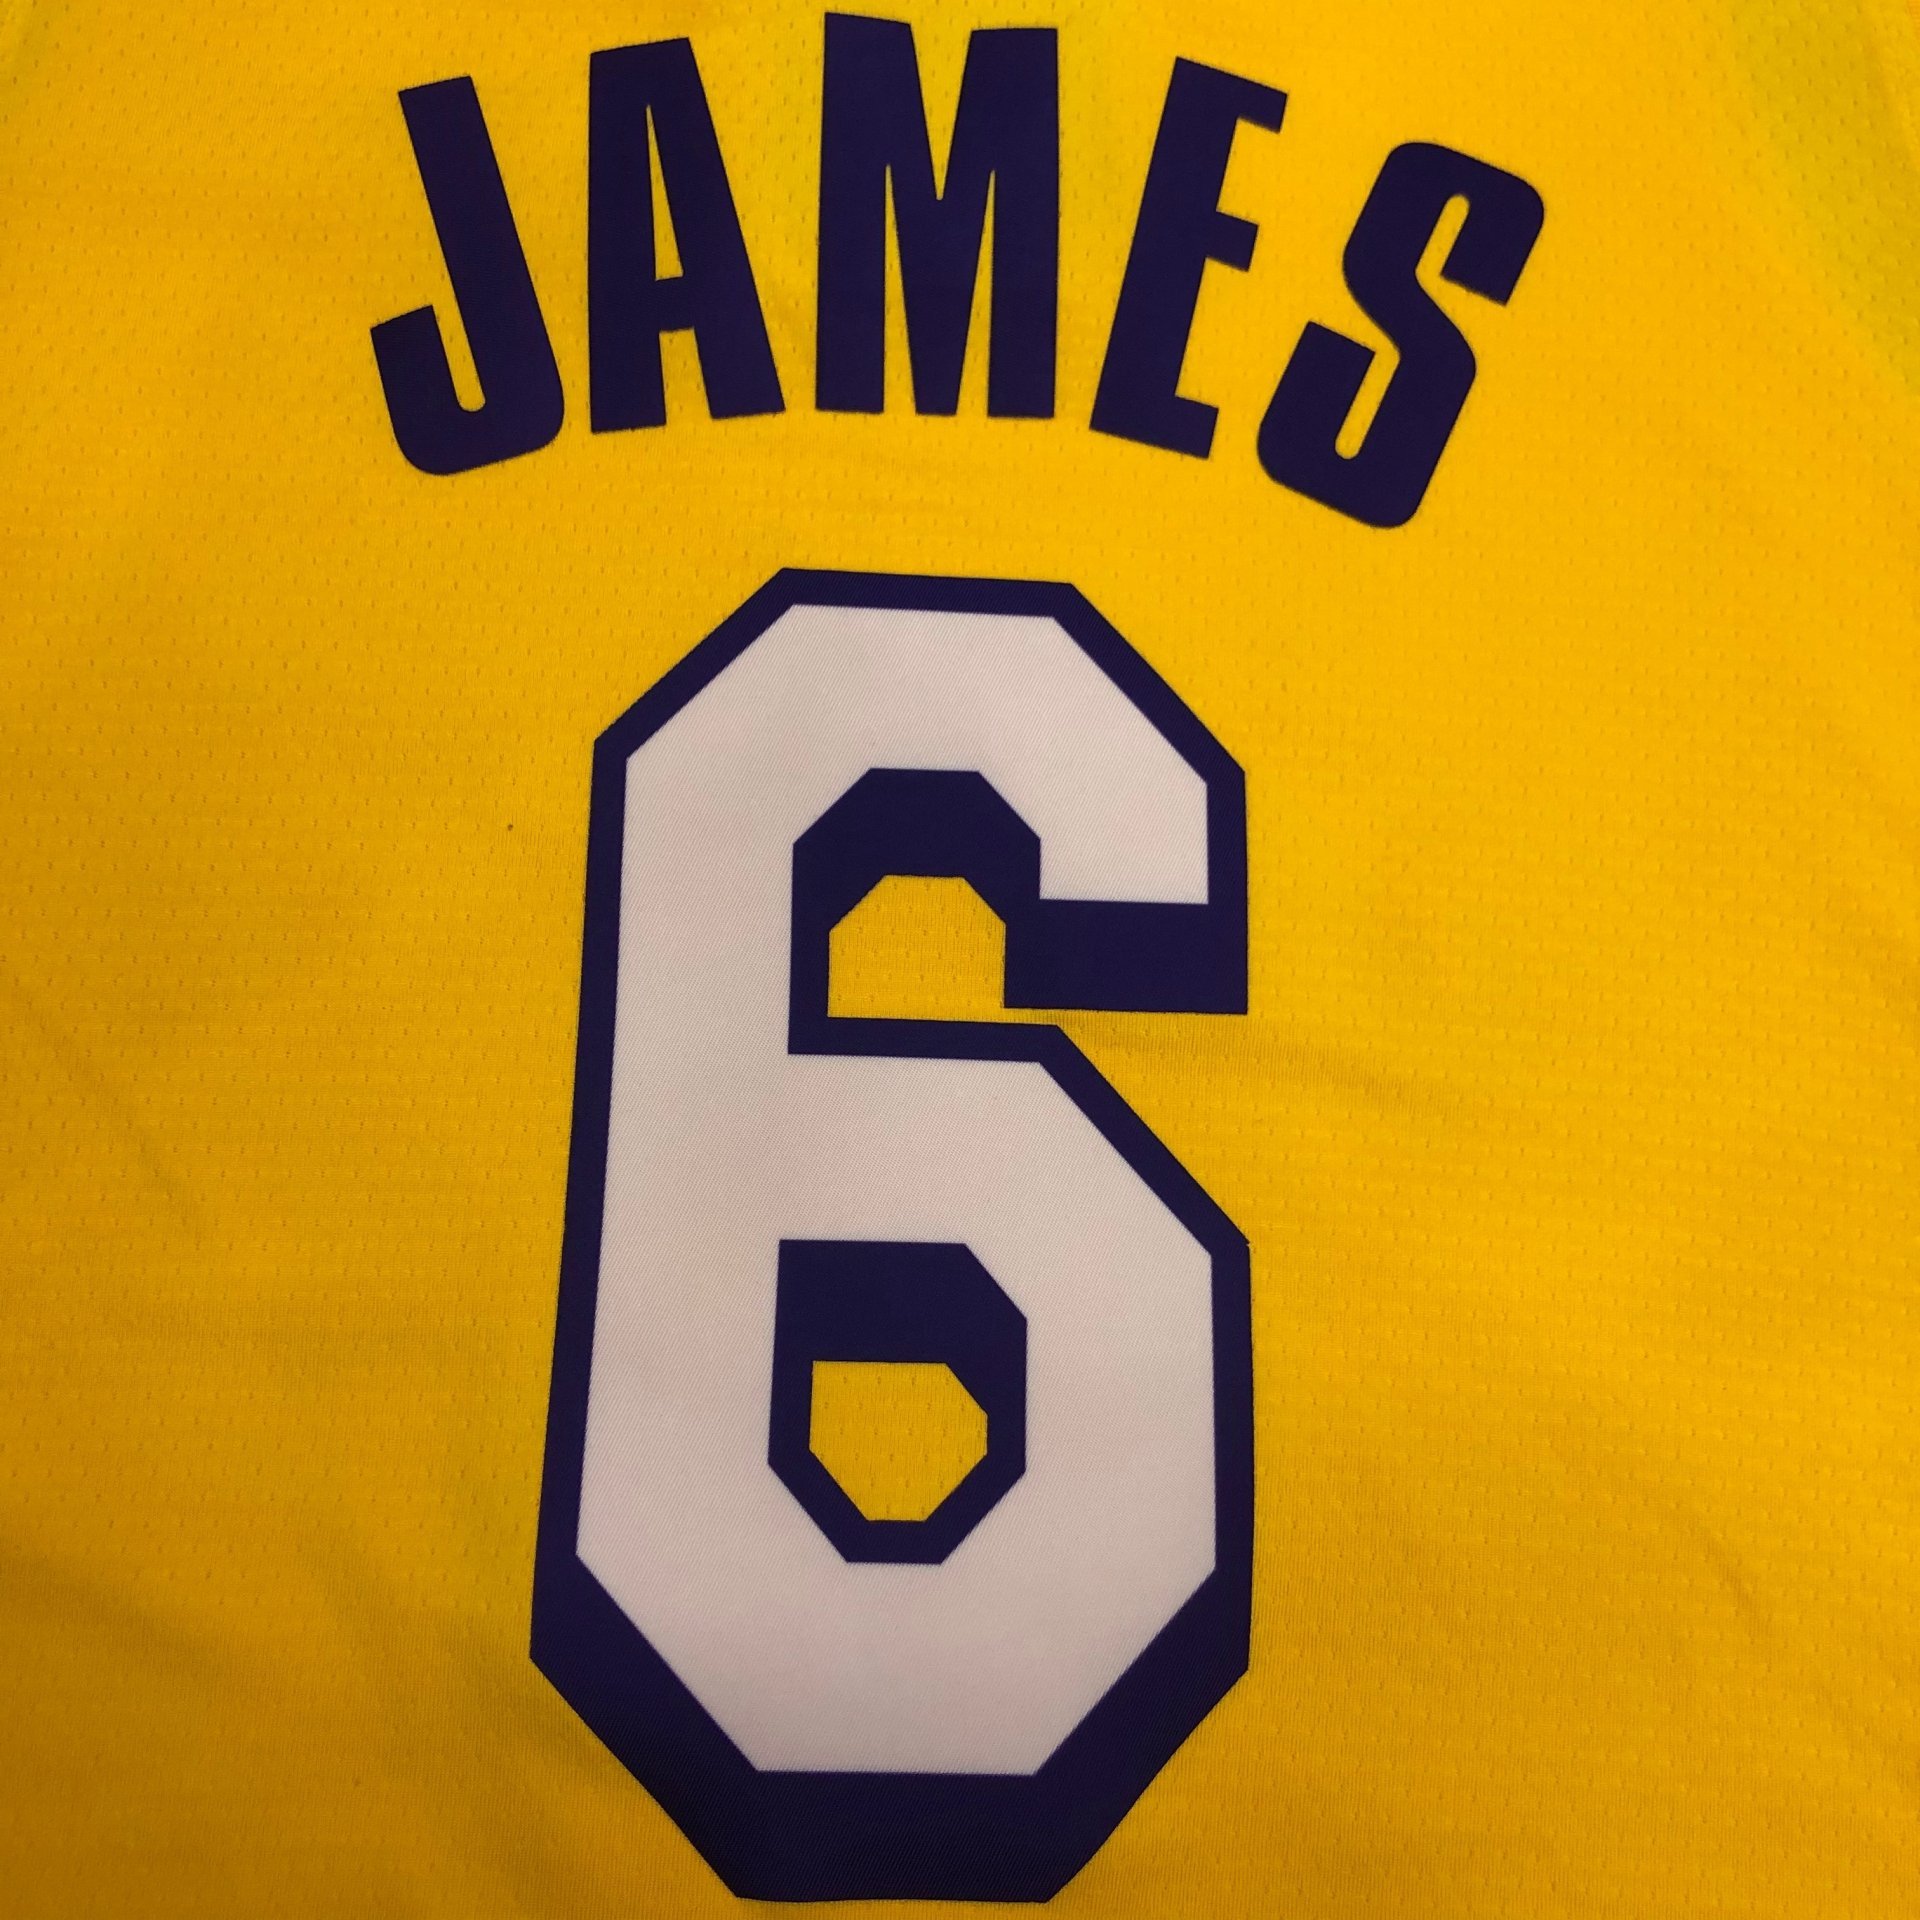 LA Lakers LeBron James Jersey Yellow M L XL for Sale in